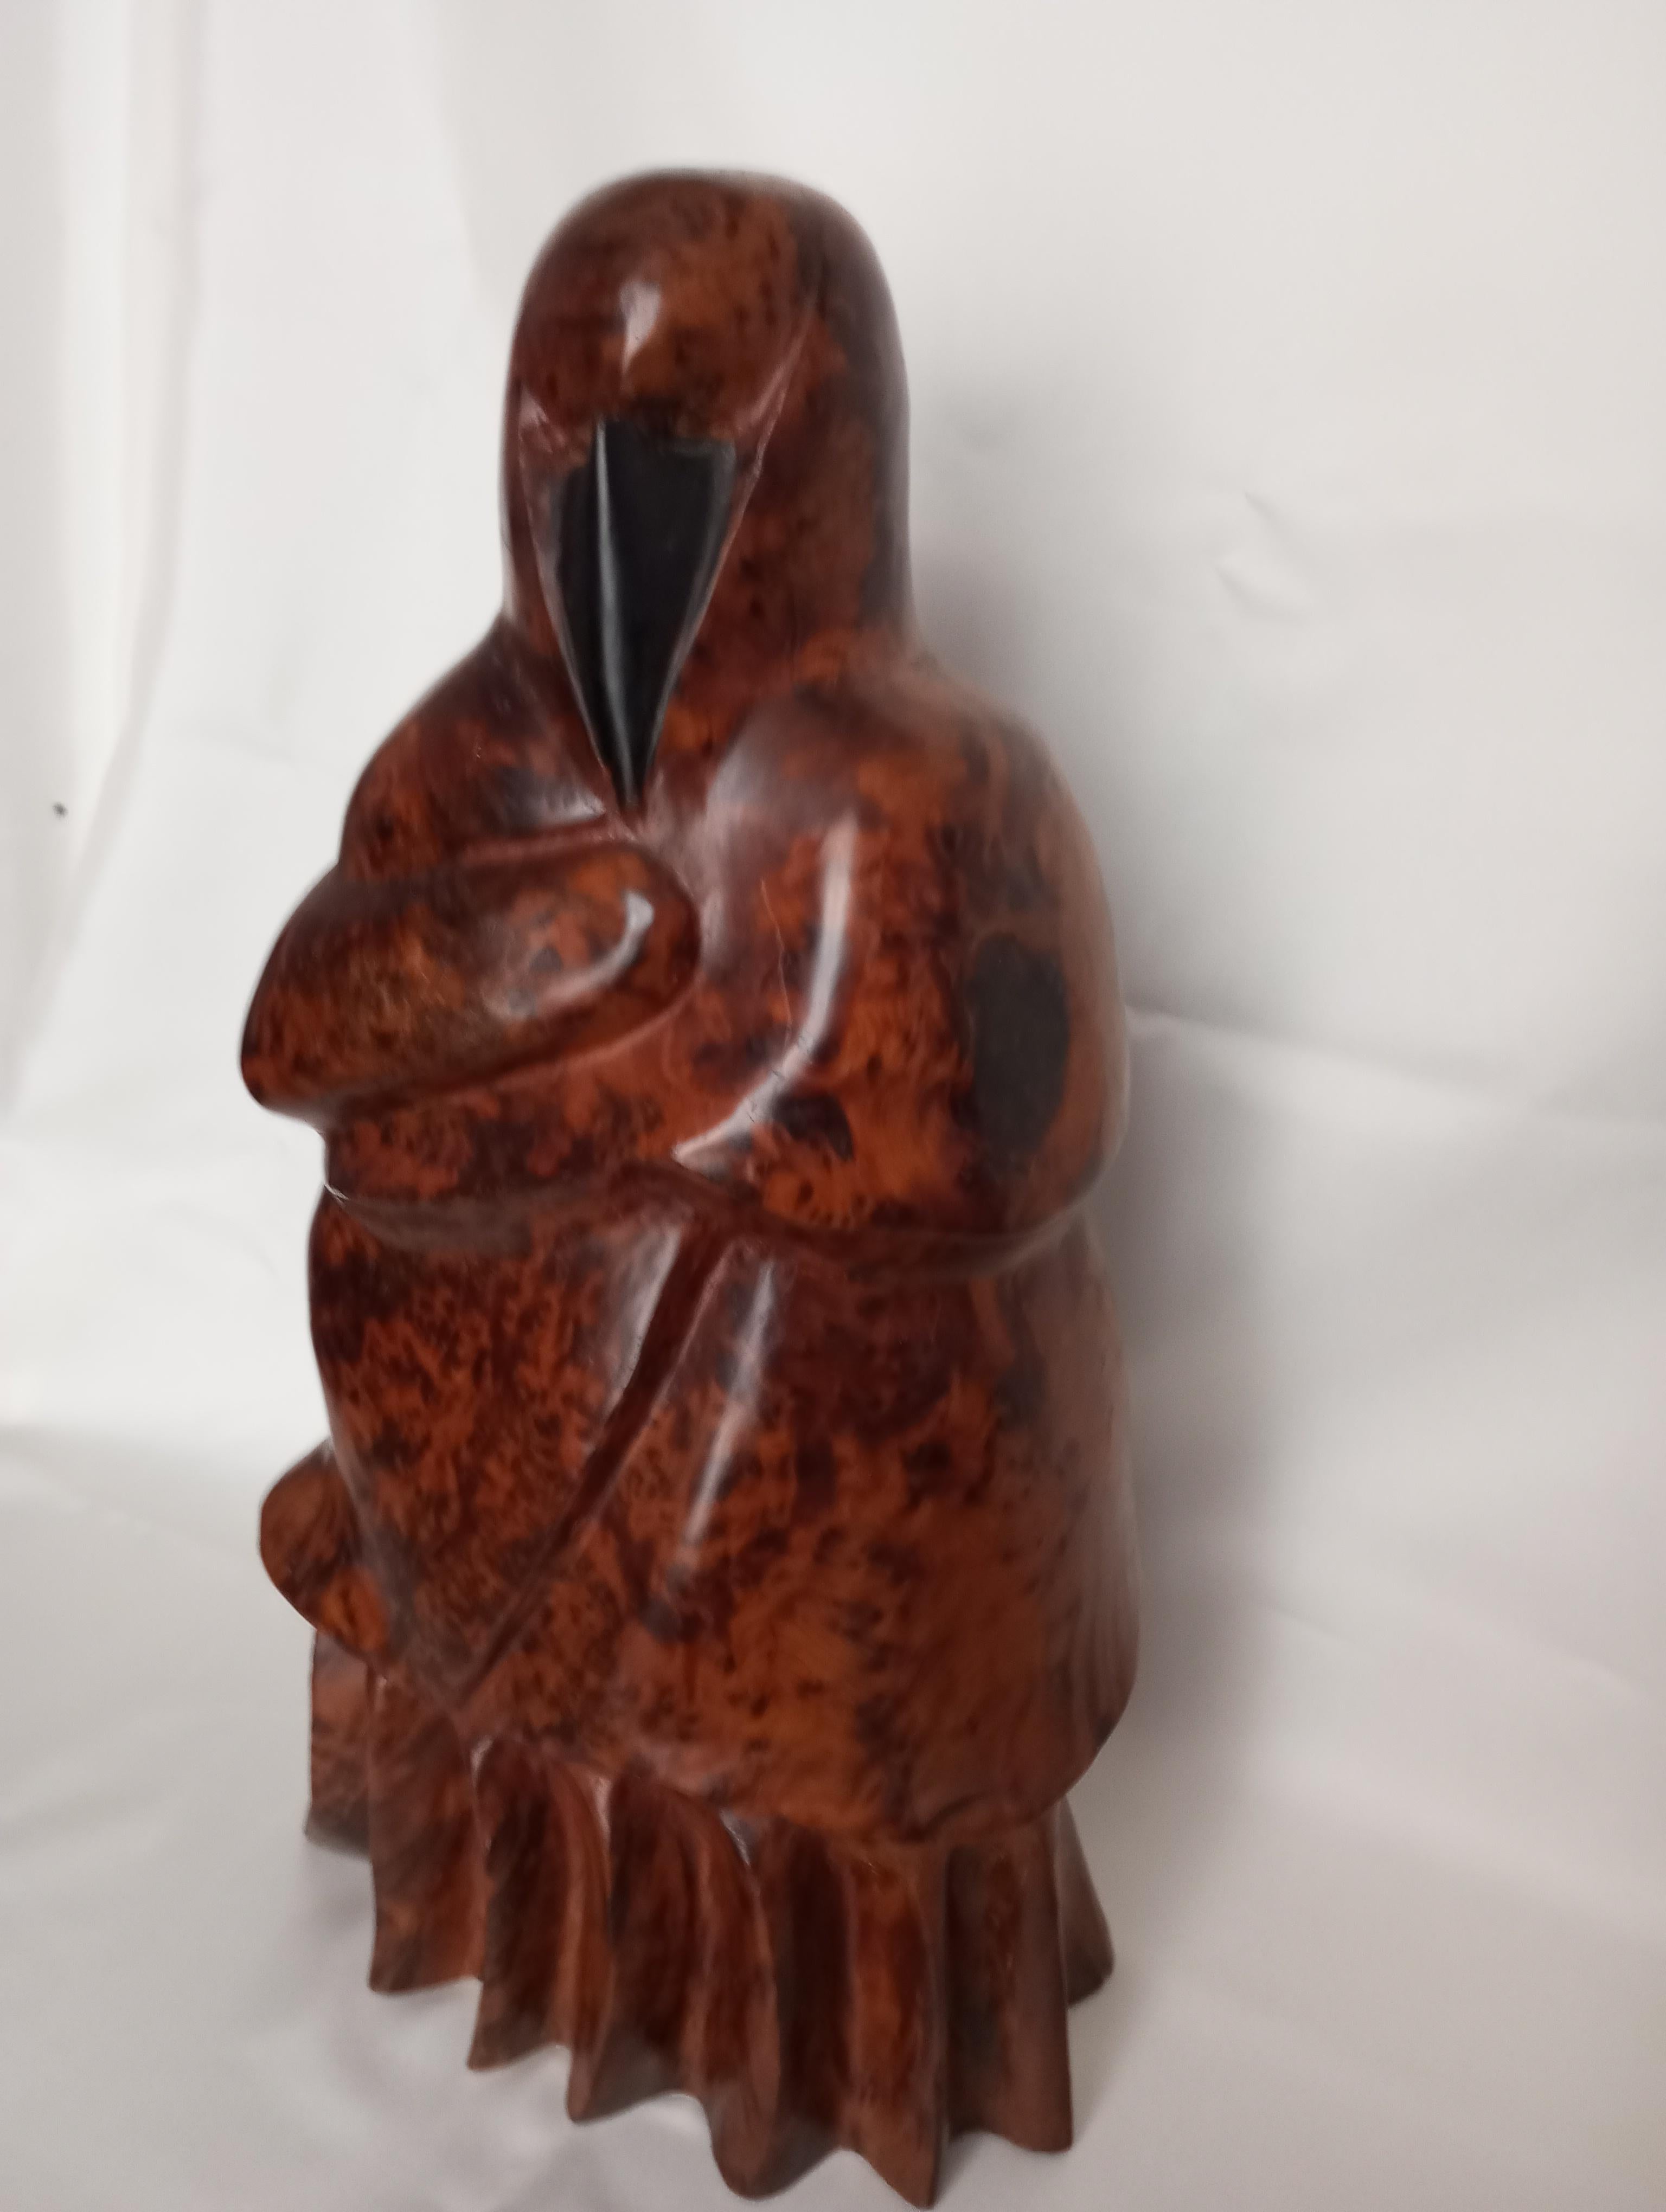 
Sculpture of Islamic art expertly crafted in Thuja wood, depicting a woman wearing a hijab. The female figure is sculpted with elegant and fluid lines, expressing grace. Thuja wood, with its grain, adds a natural dimension among the folds of the